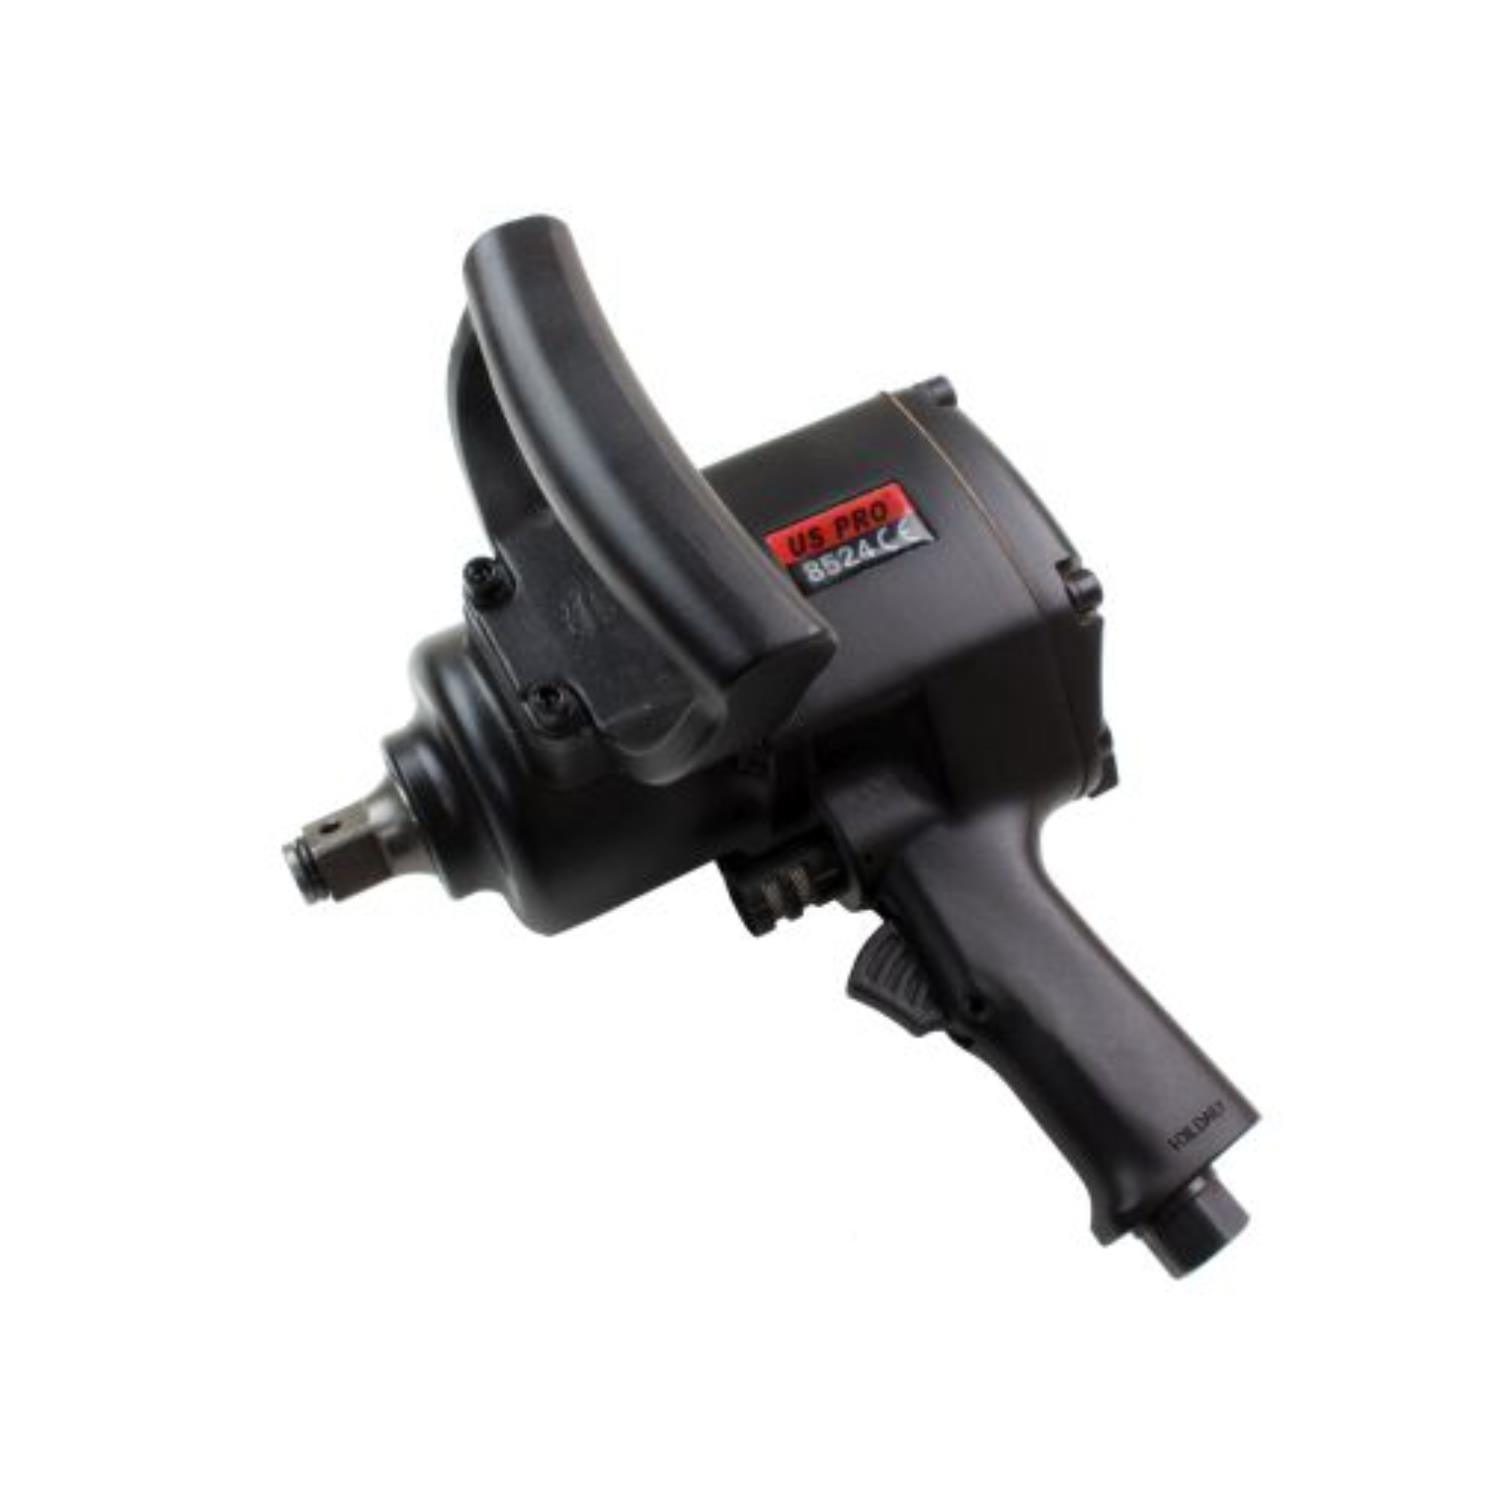 US PRO Tools 3/4" DR Air Impact Wrench Gun, 1327Ft-lb 1800nm For Sockets 8524 - Tools 2U Direct SW